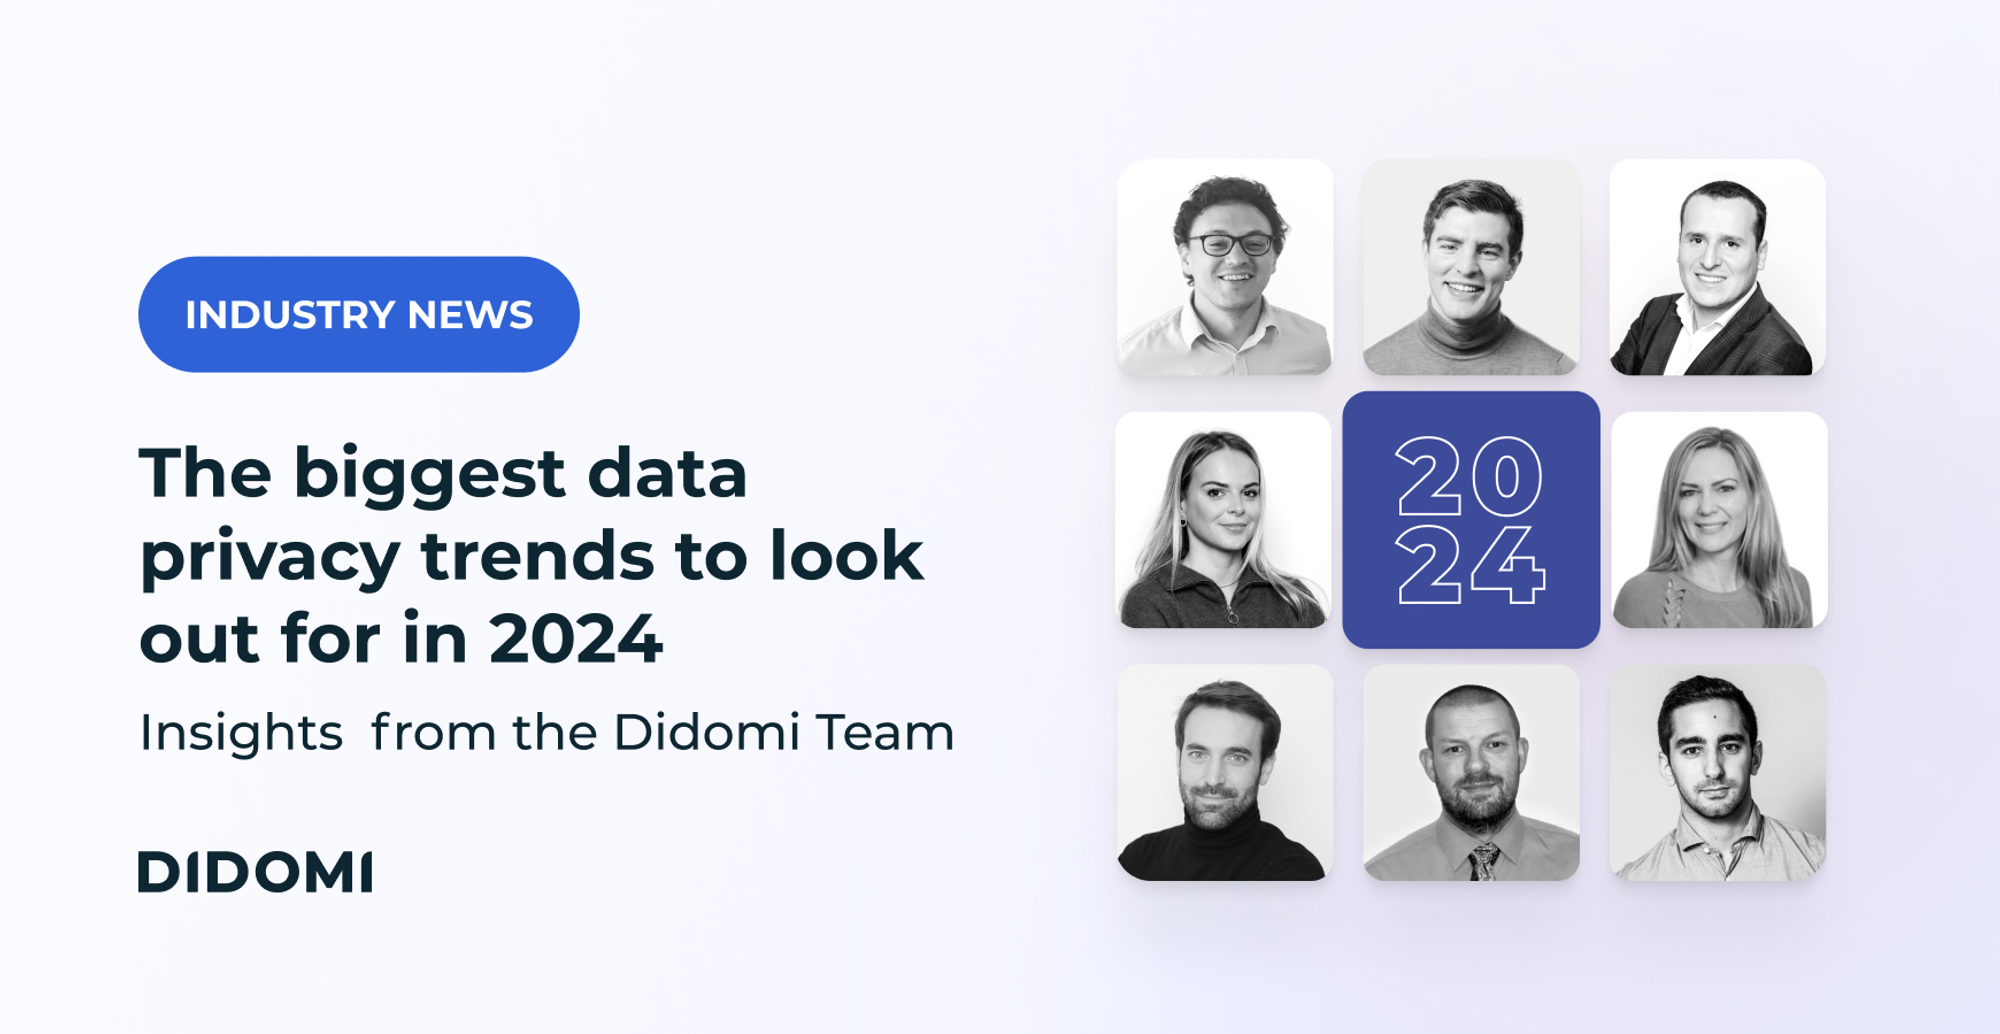 Top data privacy trends for 2024: Insights from the Didomi team